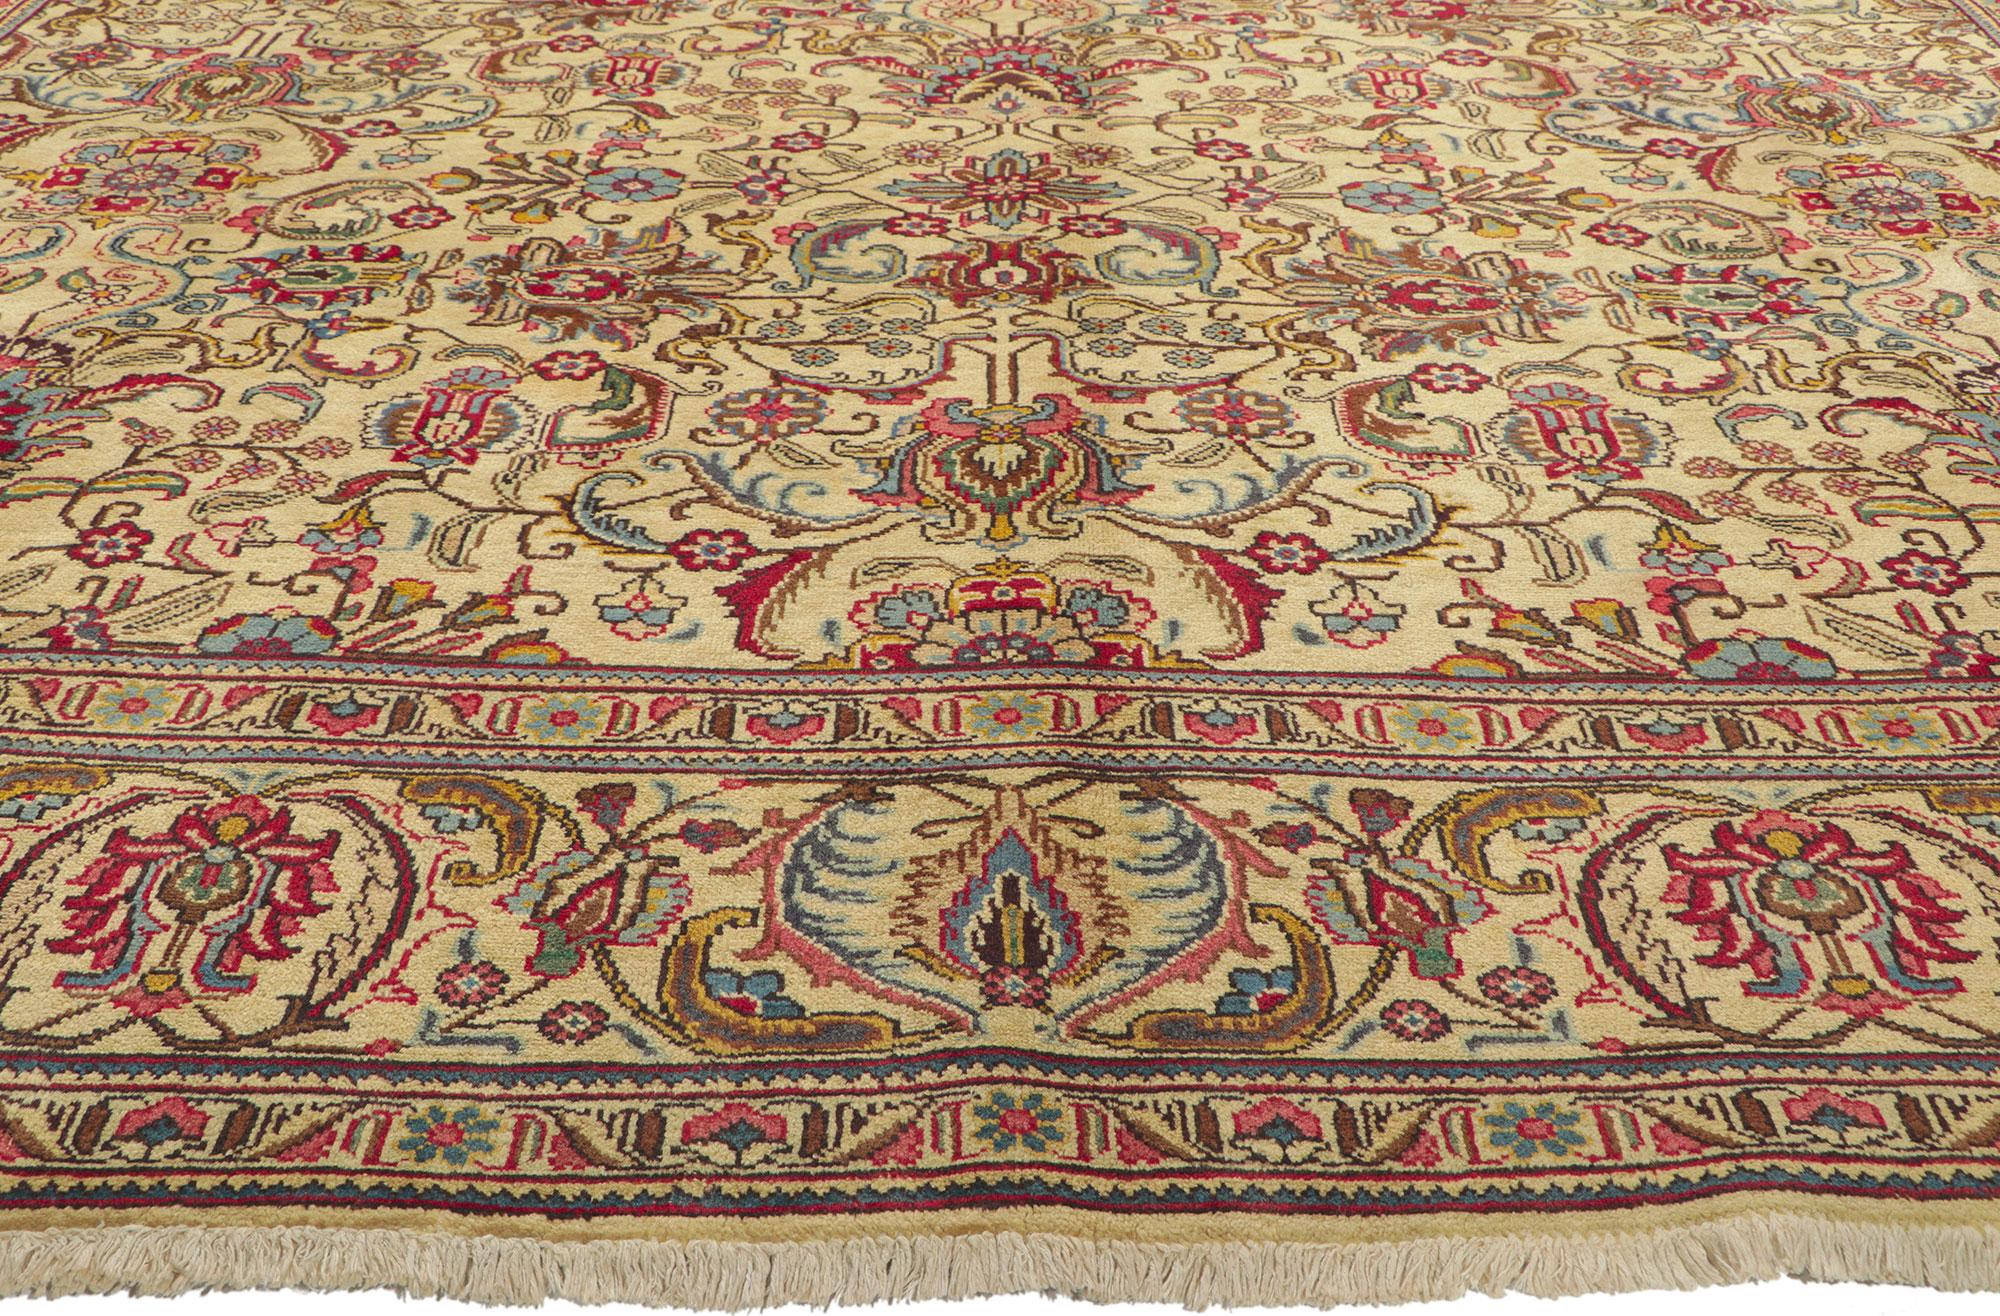 Vintage Persian Tabriz Rug with Pastel Earth-Tone Colors In Good Condition For Sale In Dallas, TX